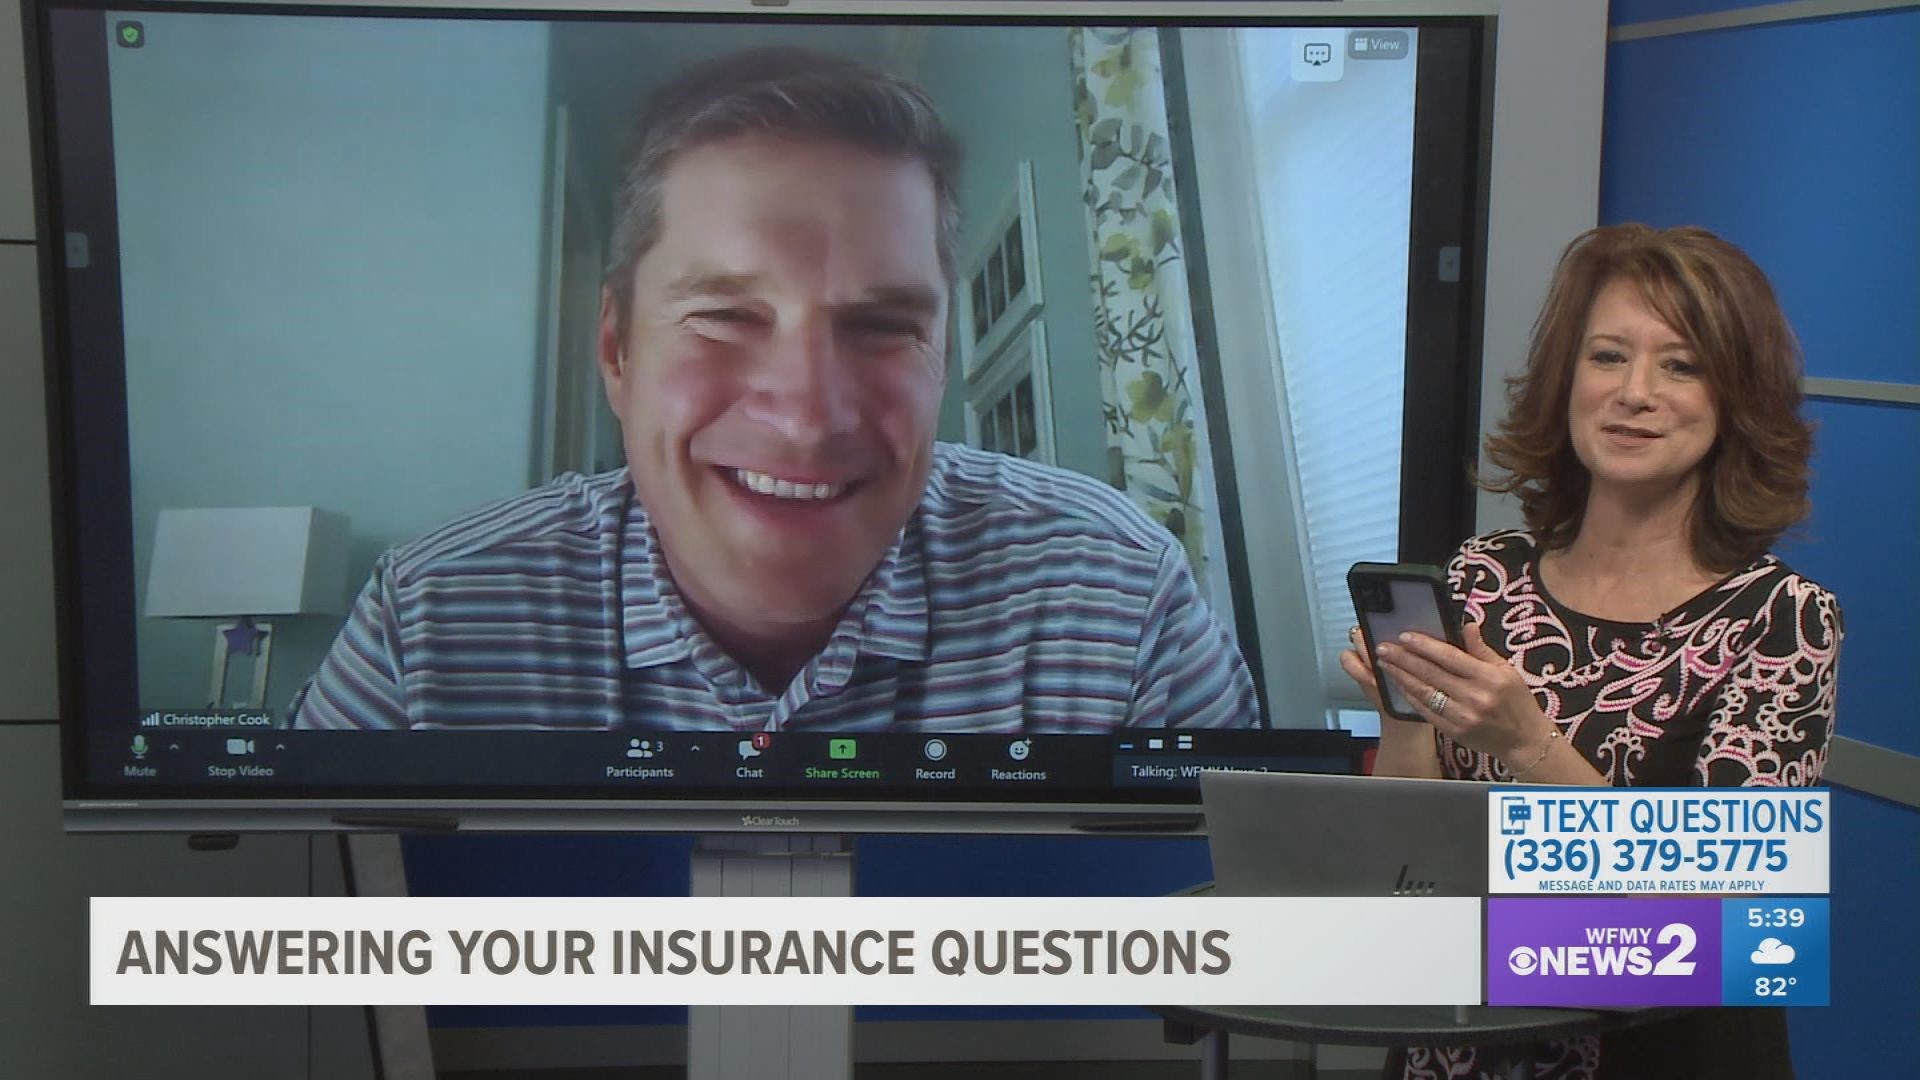 Christopher Cook with Alliance Insurance answers questions about home and auto insurance policies.